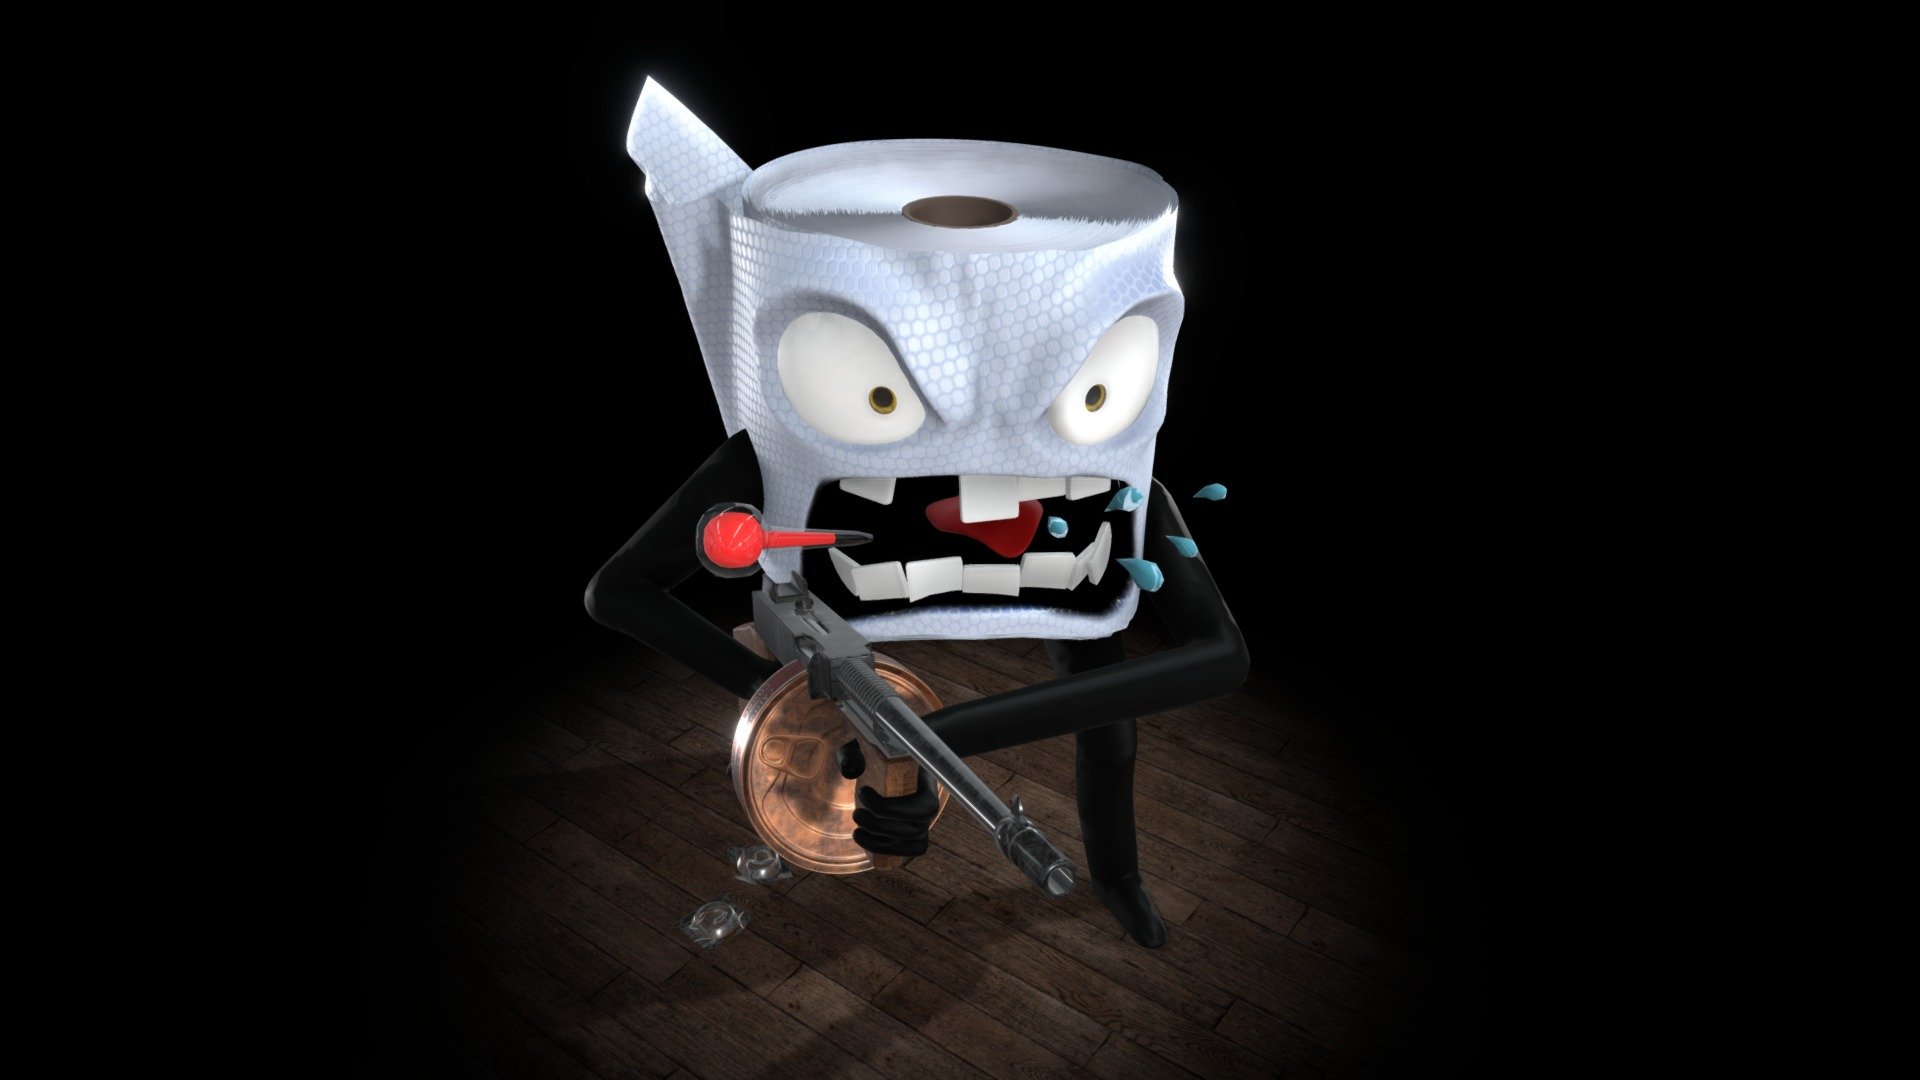 Toiletpaperface is always out and about fighting viruses, so you don't have to. And with his trustworthy paracetamol tabs by his side, he poses quite the threat.


stayhome - Toiletpaperface - 3D model by stuffsbynorik (@norikimami) 3d model